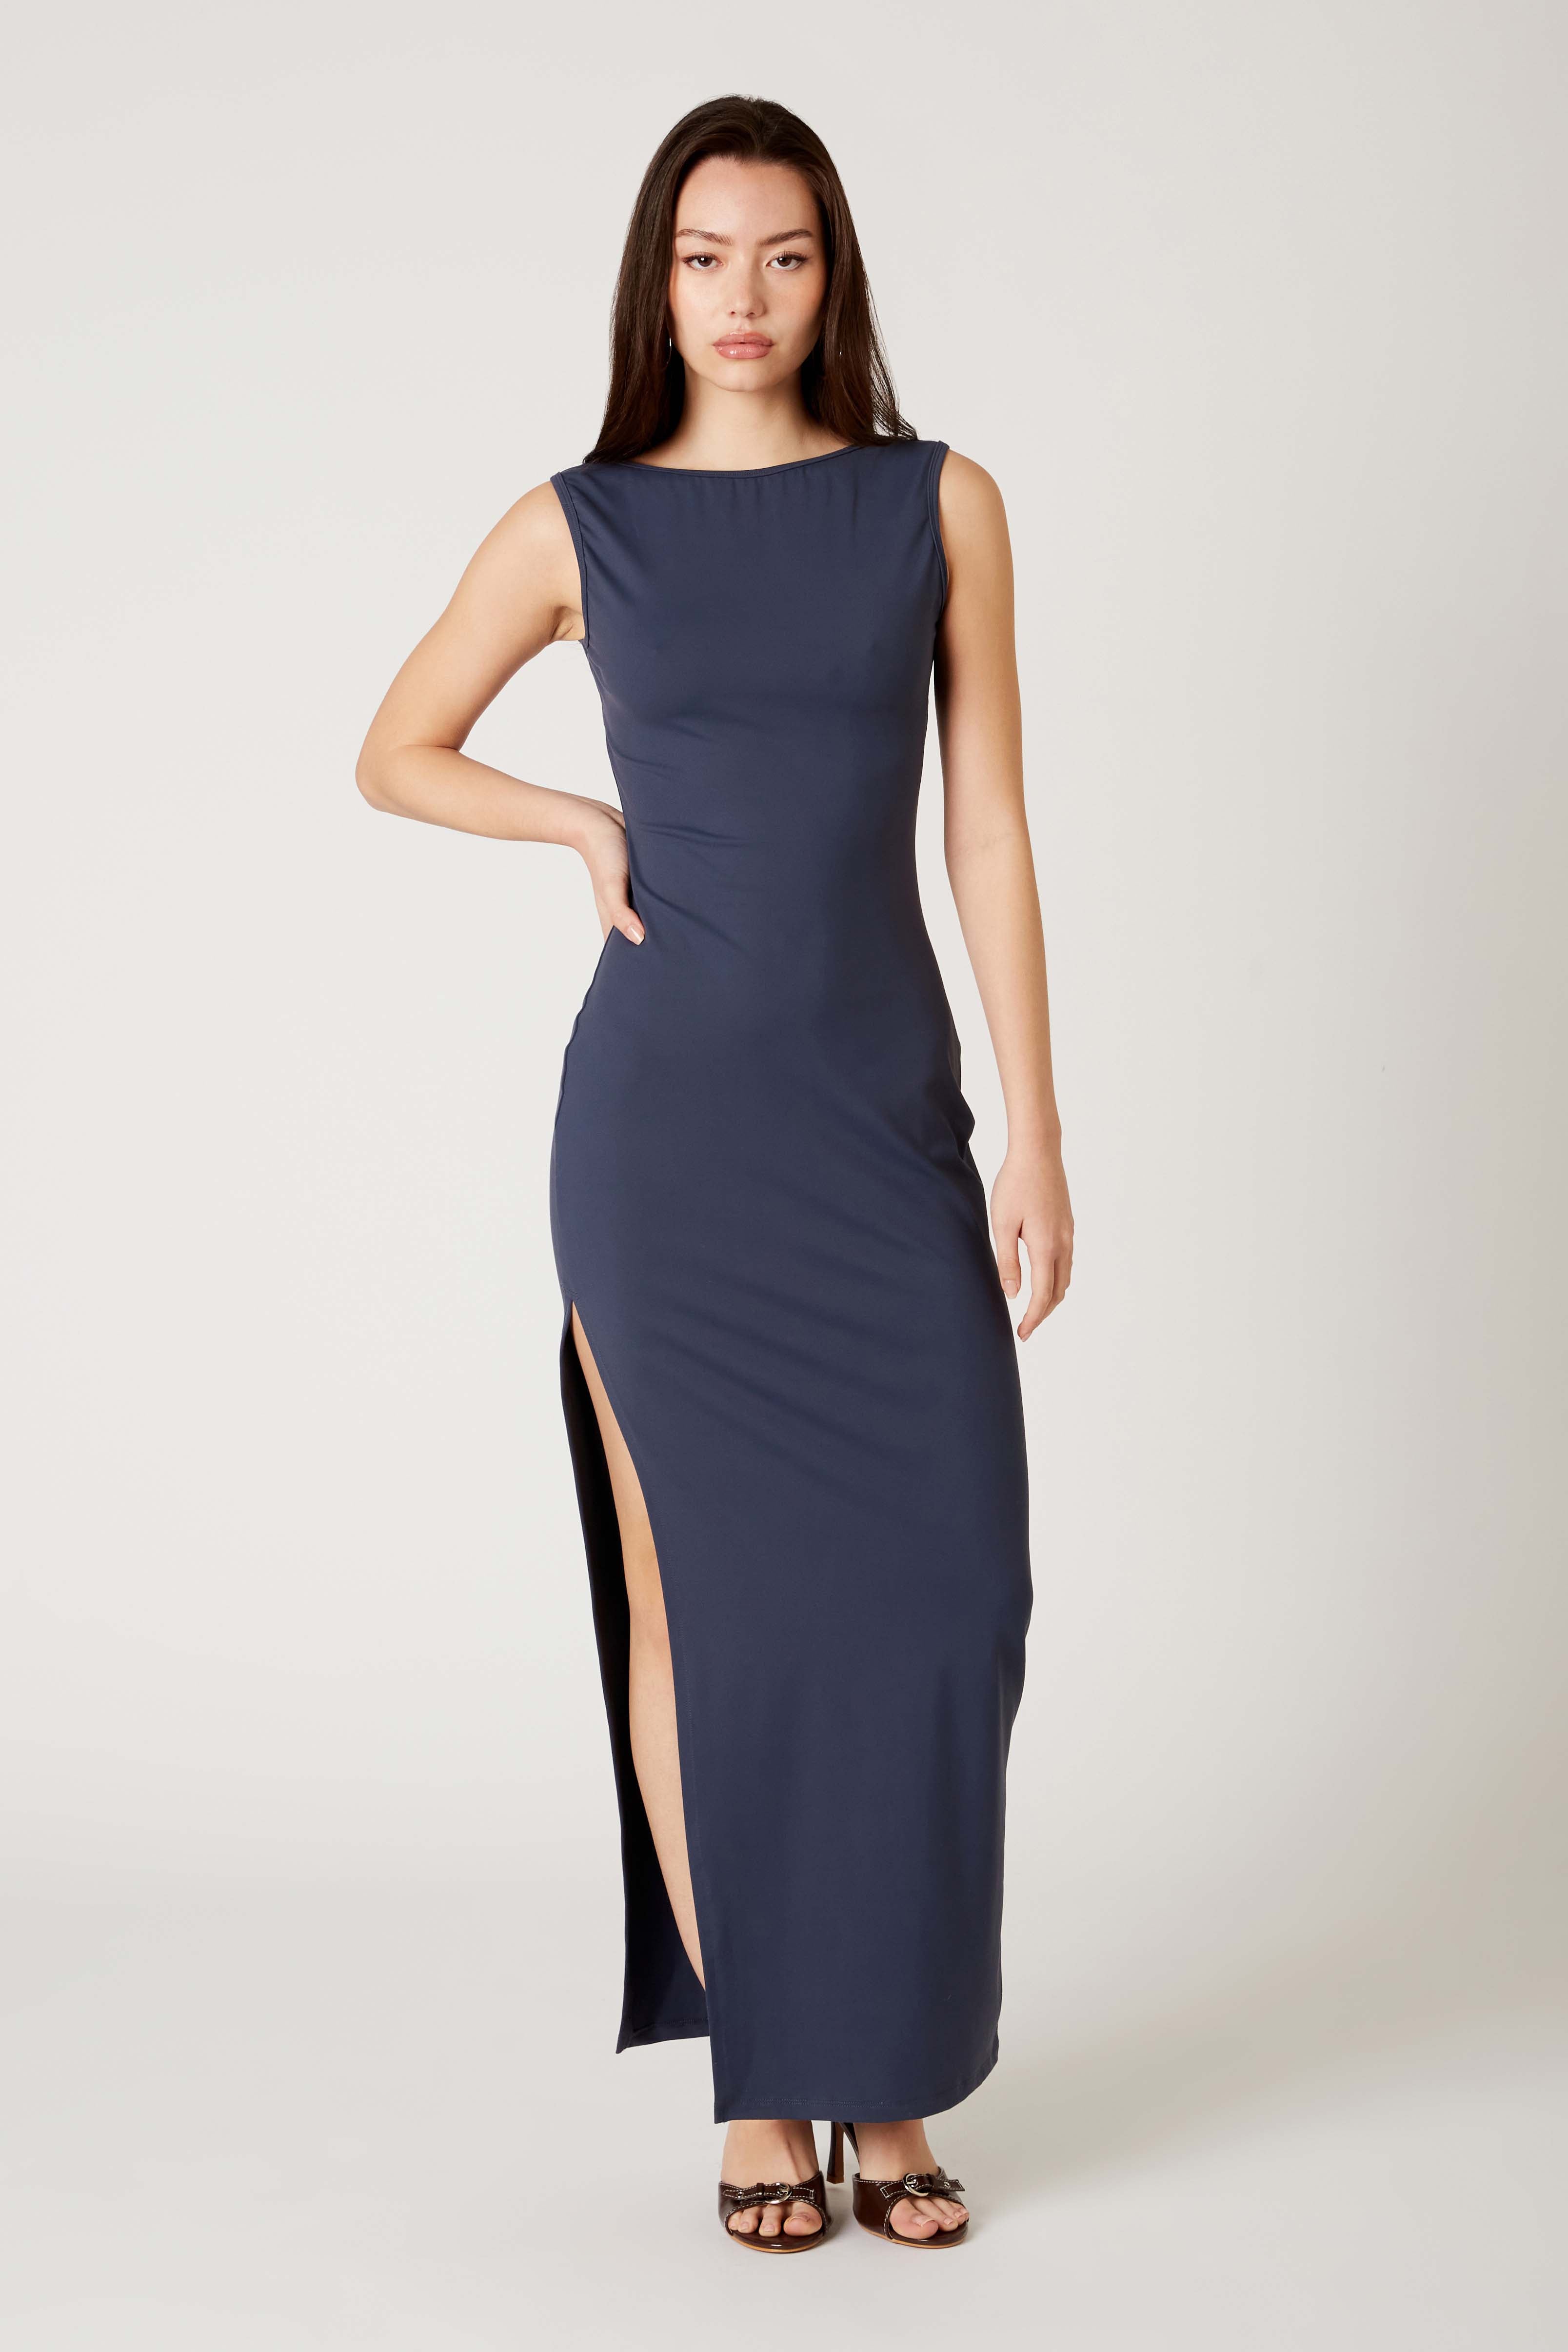 Bodycon Maxi Dress in pewter front view